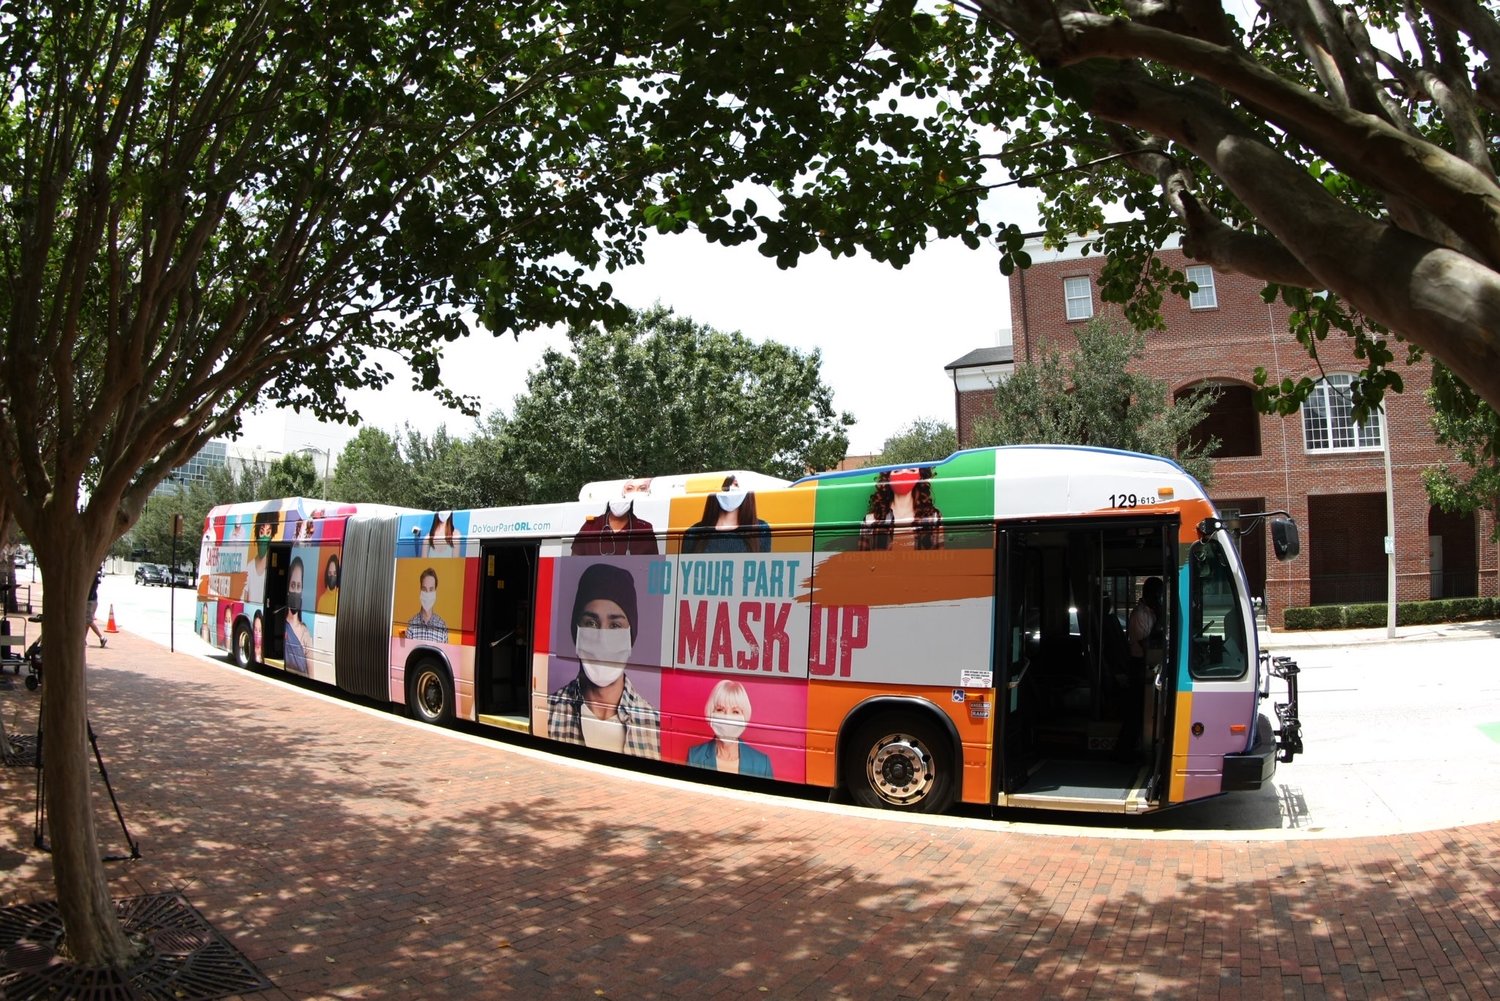 Thank you to LYNX for providing a Safer, Stronger, Together bus wrap to promote the regional safe campaign for both residents and businesses. Visit www.DoYourParORL to learn more. 
Thank you Visit Orlando, LYNX and Orlando Economic Partnership!